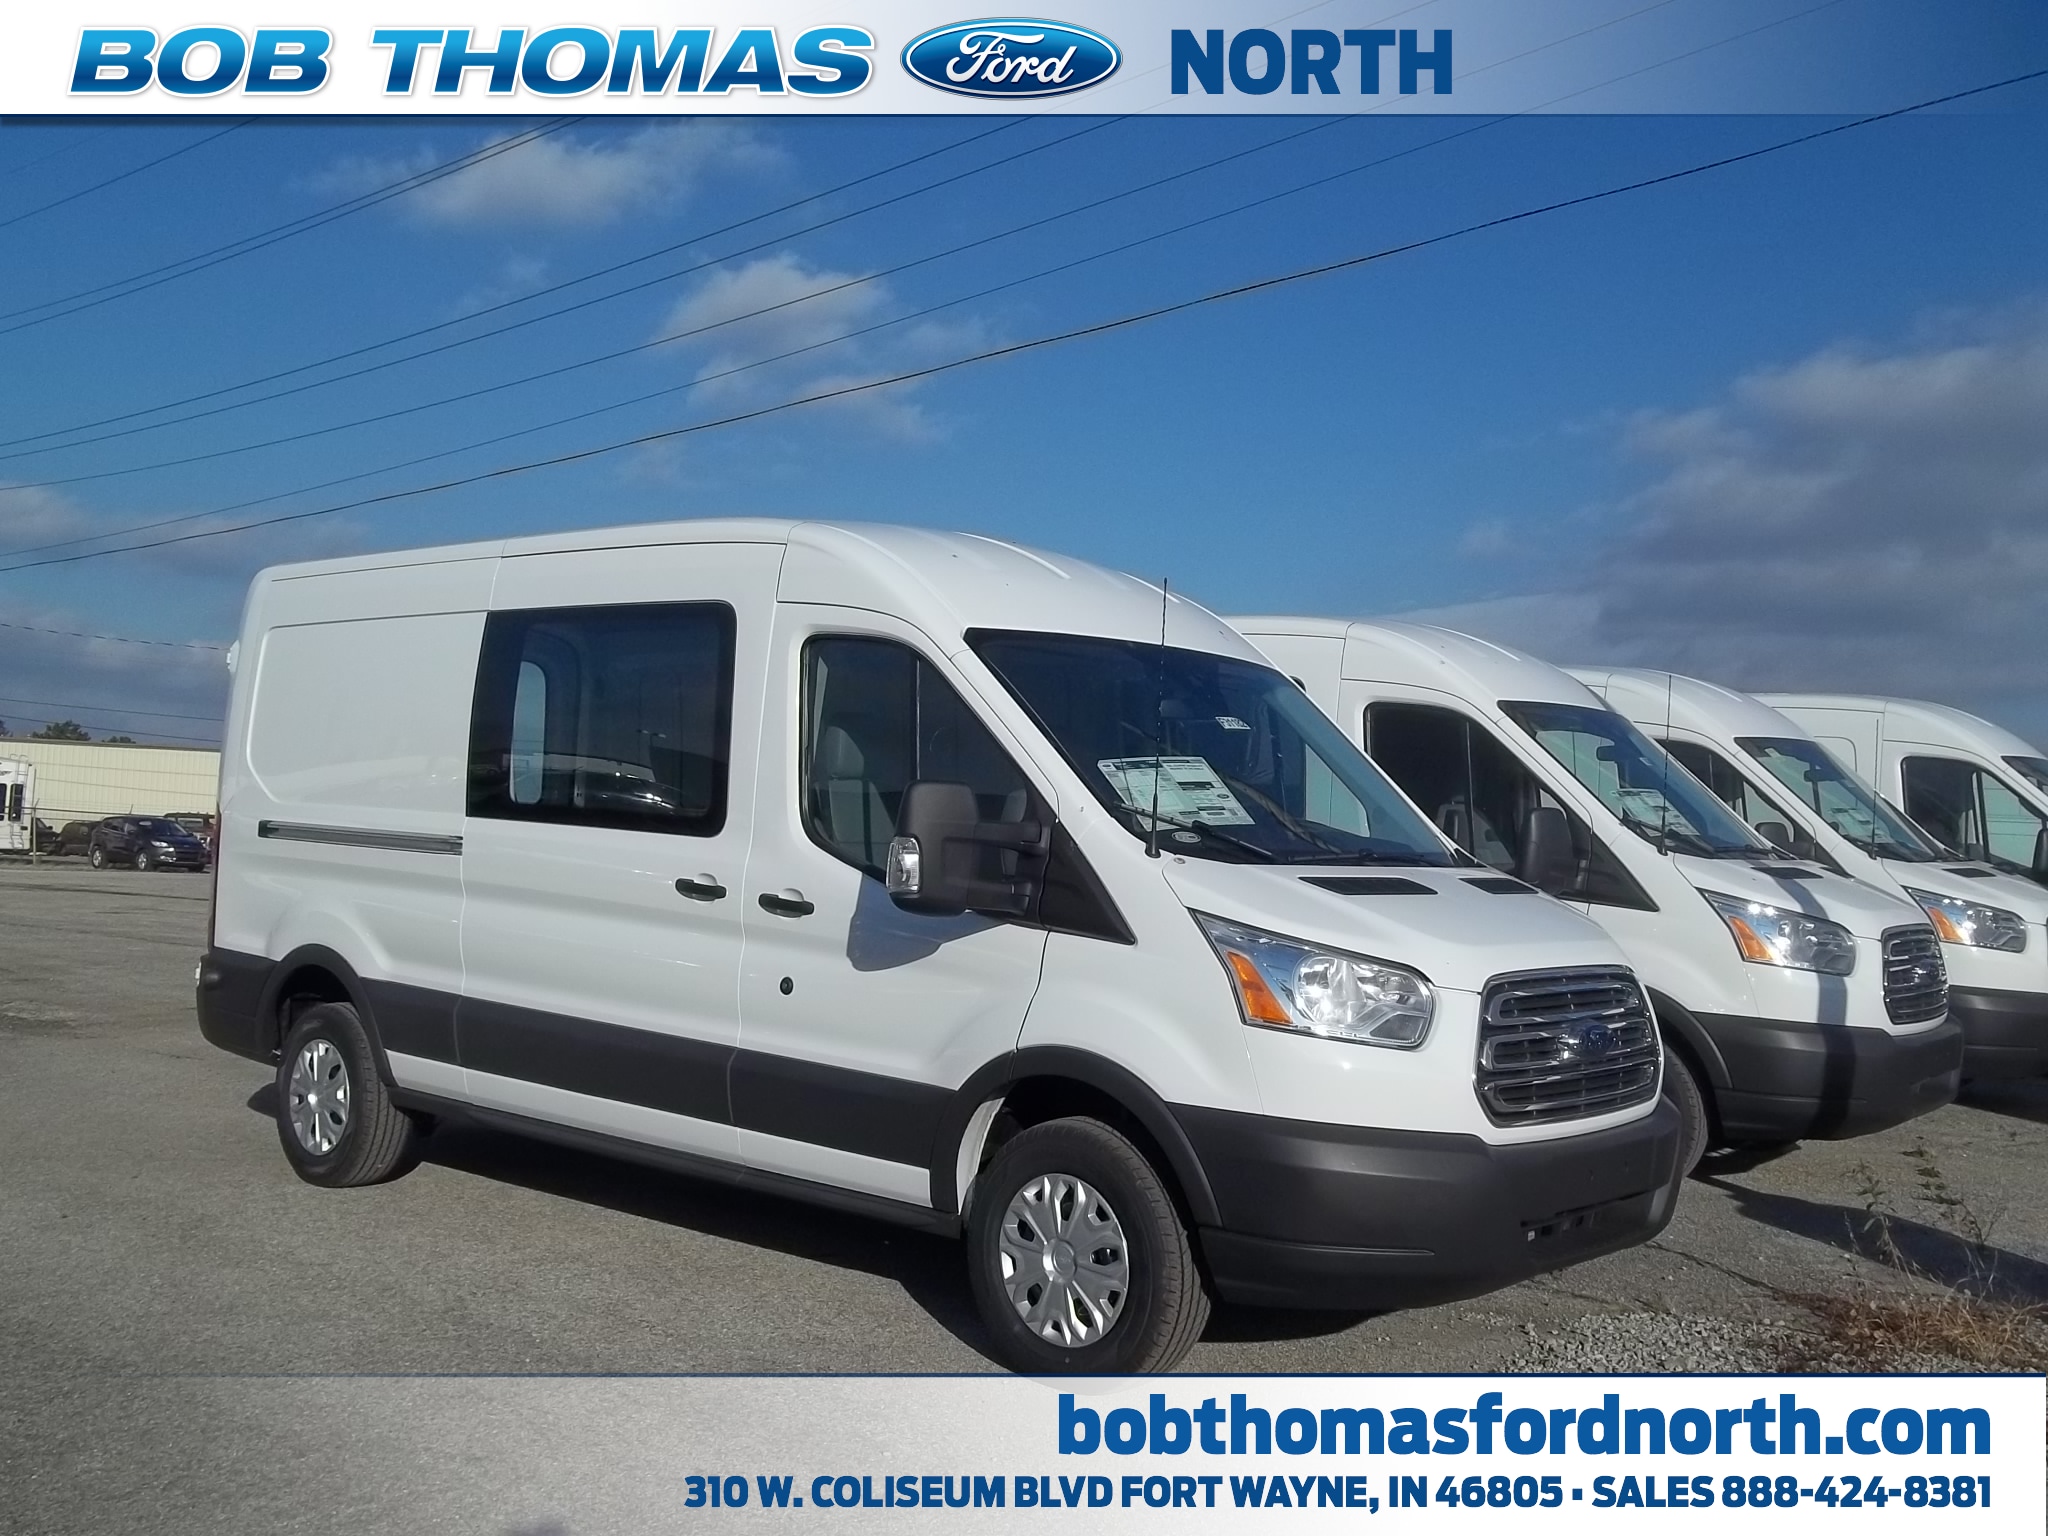 2016 ford van for sale